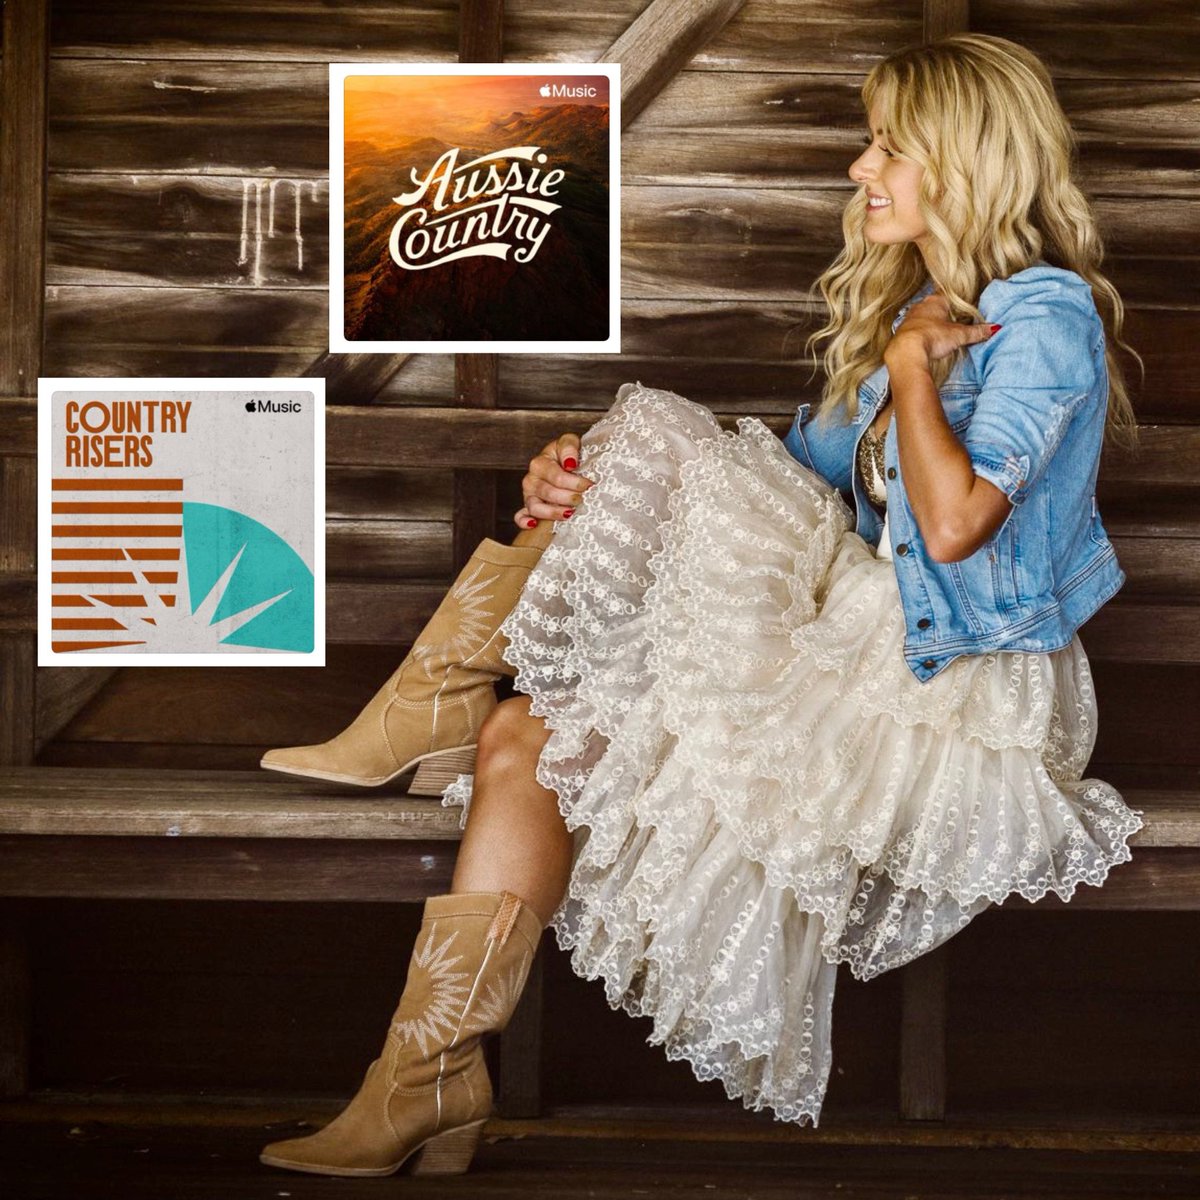 Thank you to @AppleMusic for the playlist love 🫶 Please give “She’s Mine to Love” a spin on the Aussie Country & Country Risers playlists ❤️✨🎶 #country #countrymusic #nashville #singersongwriter #womenincountry #countryradio #applemusic #newmusic #shesminetolove #countrygirl